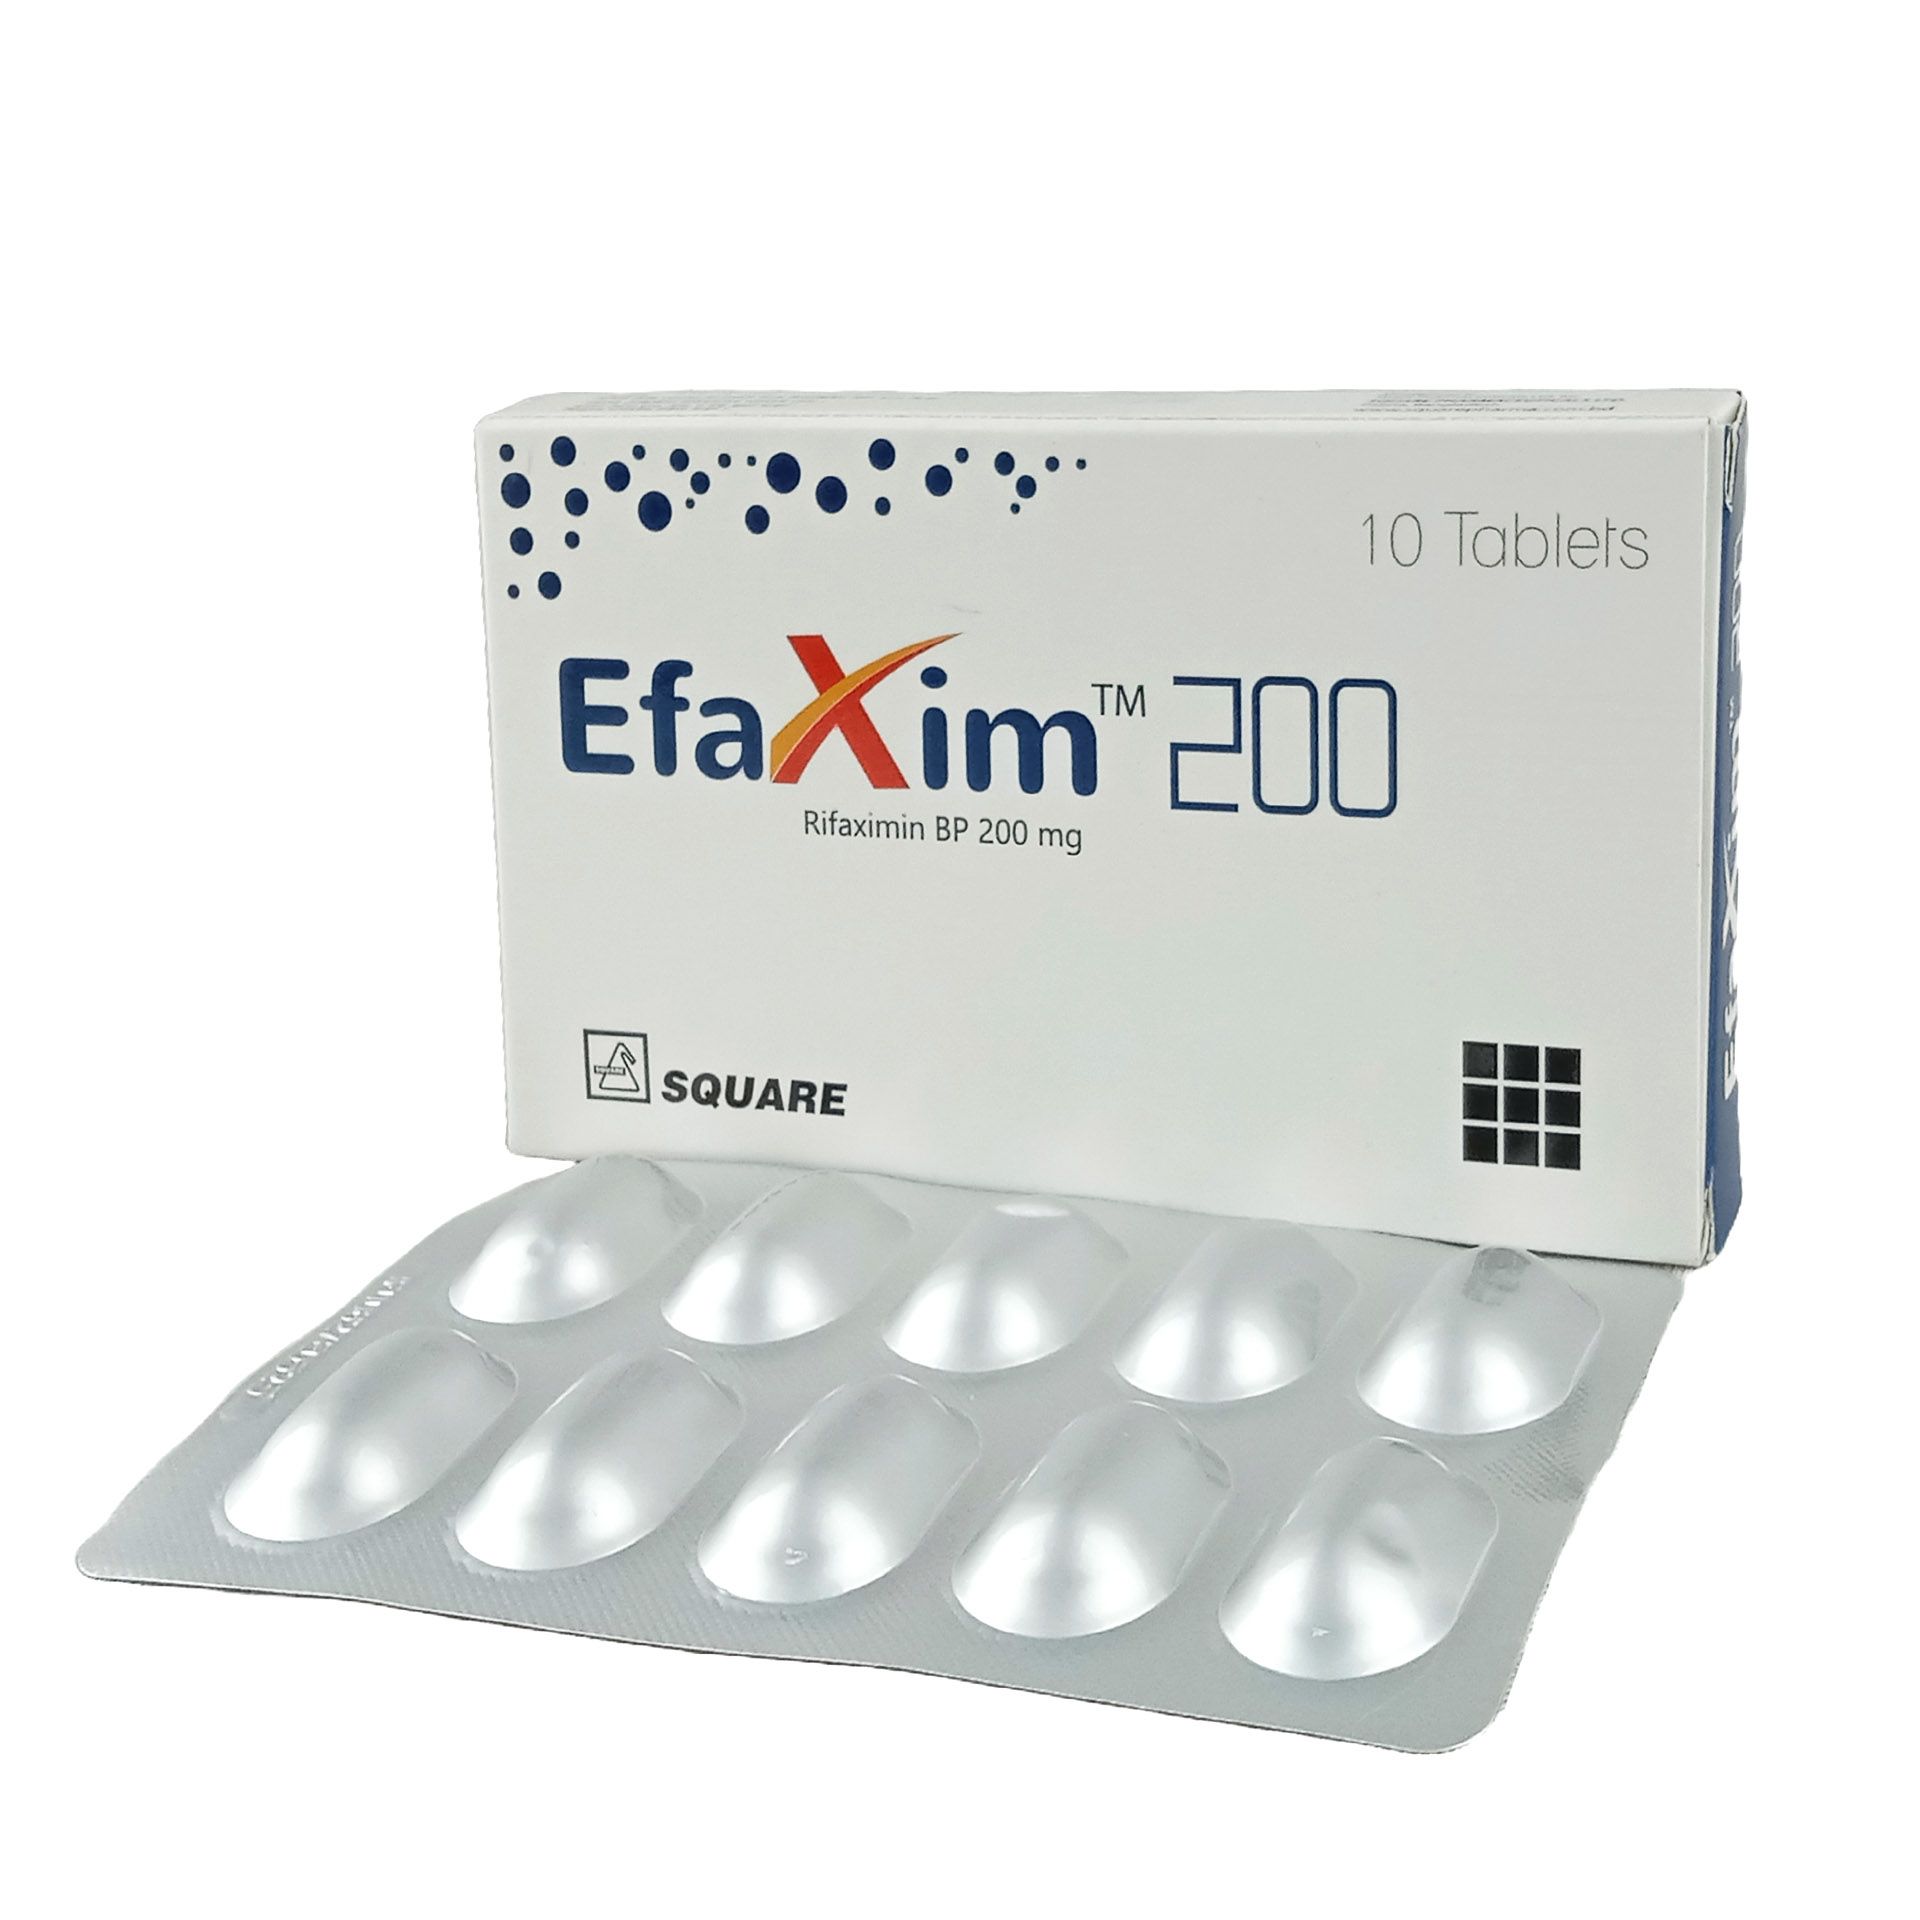 Efaxim 200mg Tablet